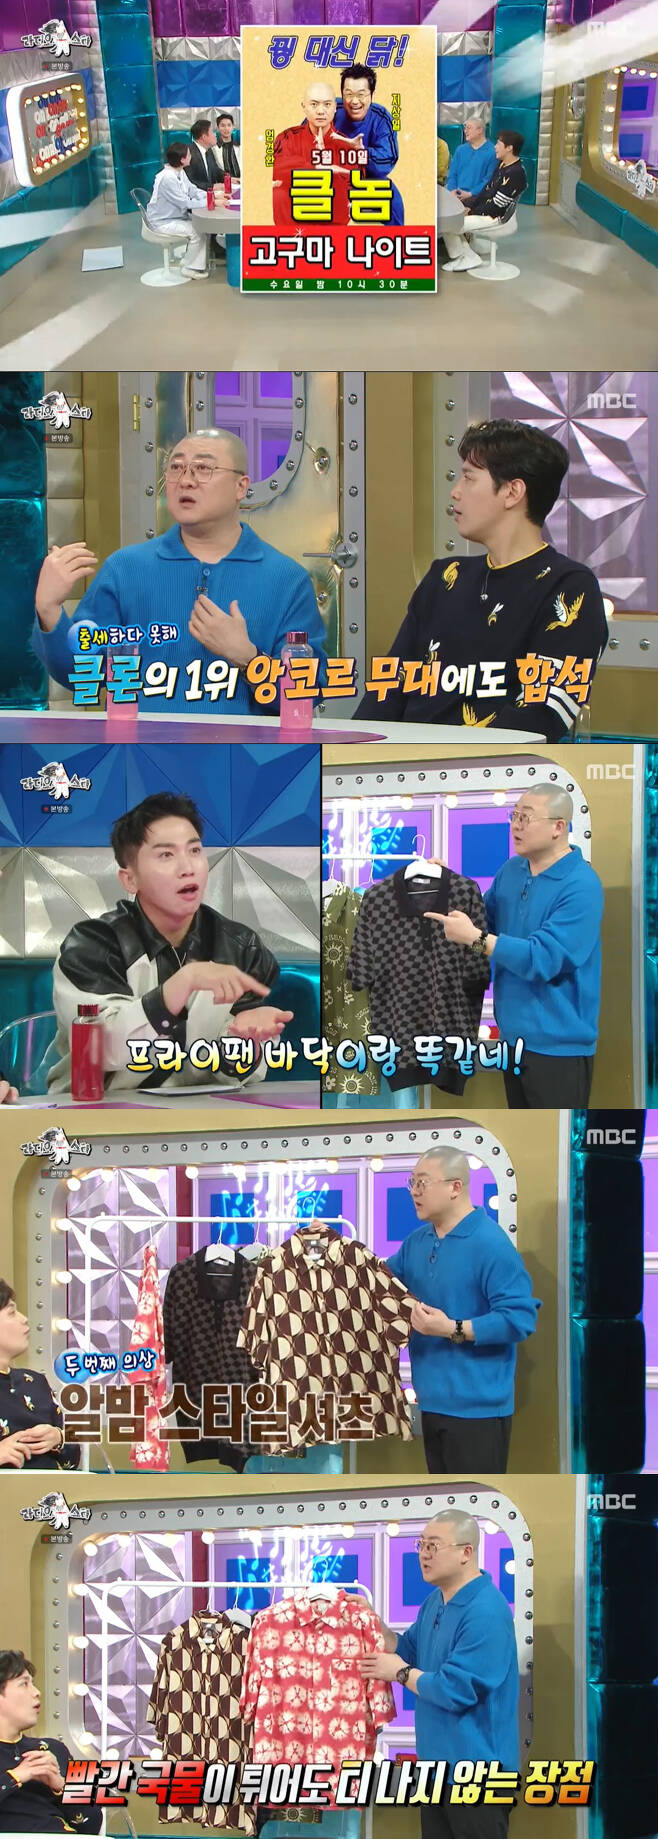 Kyunghwan Yeom, a comedian who enjoys the heyday of sales in the home shopping system, showed a lot of vitality.MBC entertainment program Radio Star broadcasted on the 10th was decorated with two special features of My Art Uncle starring Kim Eung-su, for Kwon Il-yong, Kyunghwan Yeom and Son Jun-ho.Home shopping system Yoo Jae-seok Kyunghwan Yeom said, I prepare my own clothes. I have to wear more than 2XL size because I have a lot of weight.I buy clothes according to size and product image. The secret of home shopping is also in costumes. Actually, Kyunghwan Yeoms costume brought to the studio reminded me of related products.Kimchi introduced a red shirt for broadcasting, a chestnut-style shirt for princess night broadcasting, and a T-shirt similar to the bottom of a frying pan for frying.The main audience is people in their 50s and 70s. I like to make them understand the product in a friendly way and talk to them as if they were my friends. I dont want to make them laugh too much, he said.Kyunghwan Yeom said, I eat a lot of food, but those who cook give me the leftovers.Broadcasting When Im done, I have to throw away good food, so I broadcast and ask me to eat the food I ate at home. I do not think its salty. John Young said, You can do that.In the next life, he wanted to be born as Wife. Kyunghwan Yeom said, Wife looks so happy.If there is ubiquity in the company, wealth comes in by the surroundings even if you do not try hard, but Wife has four ubiquities.There was also a story about the comedian. Kyunghwan Yeom said, In the old days, there was a time when there was a nahuna.At that time, the original Korean wave star was Clon, so he formed a parody of Clon and Clon. 